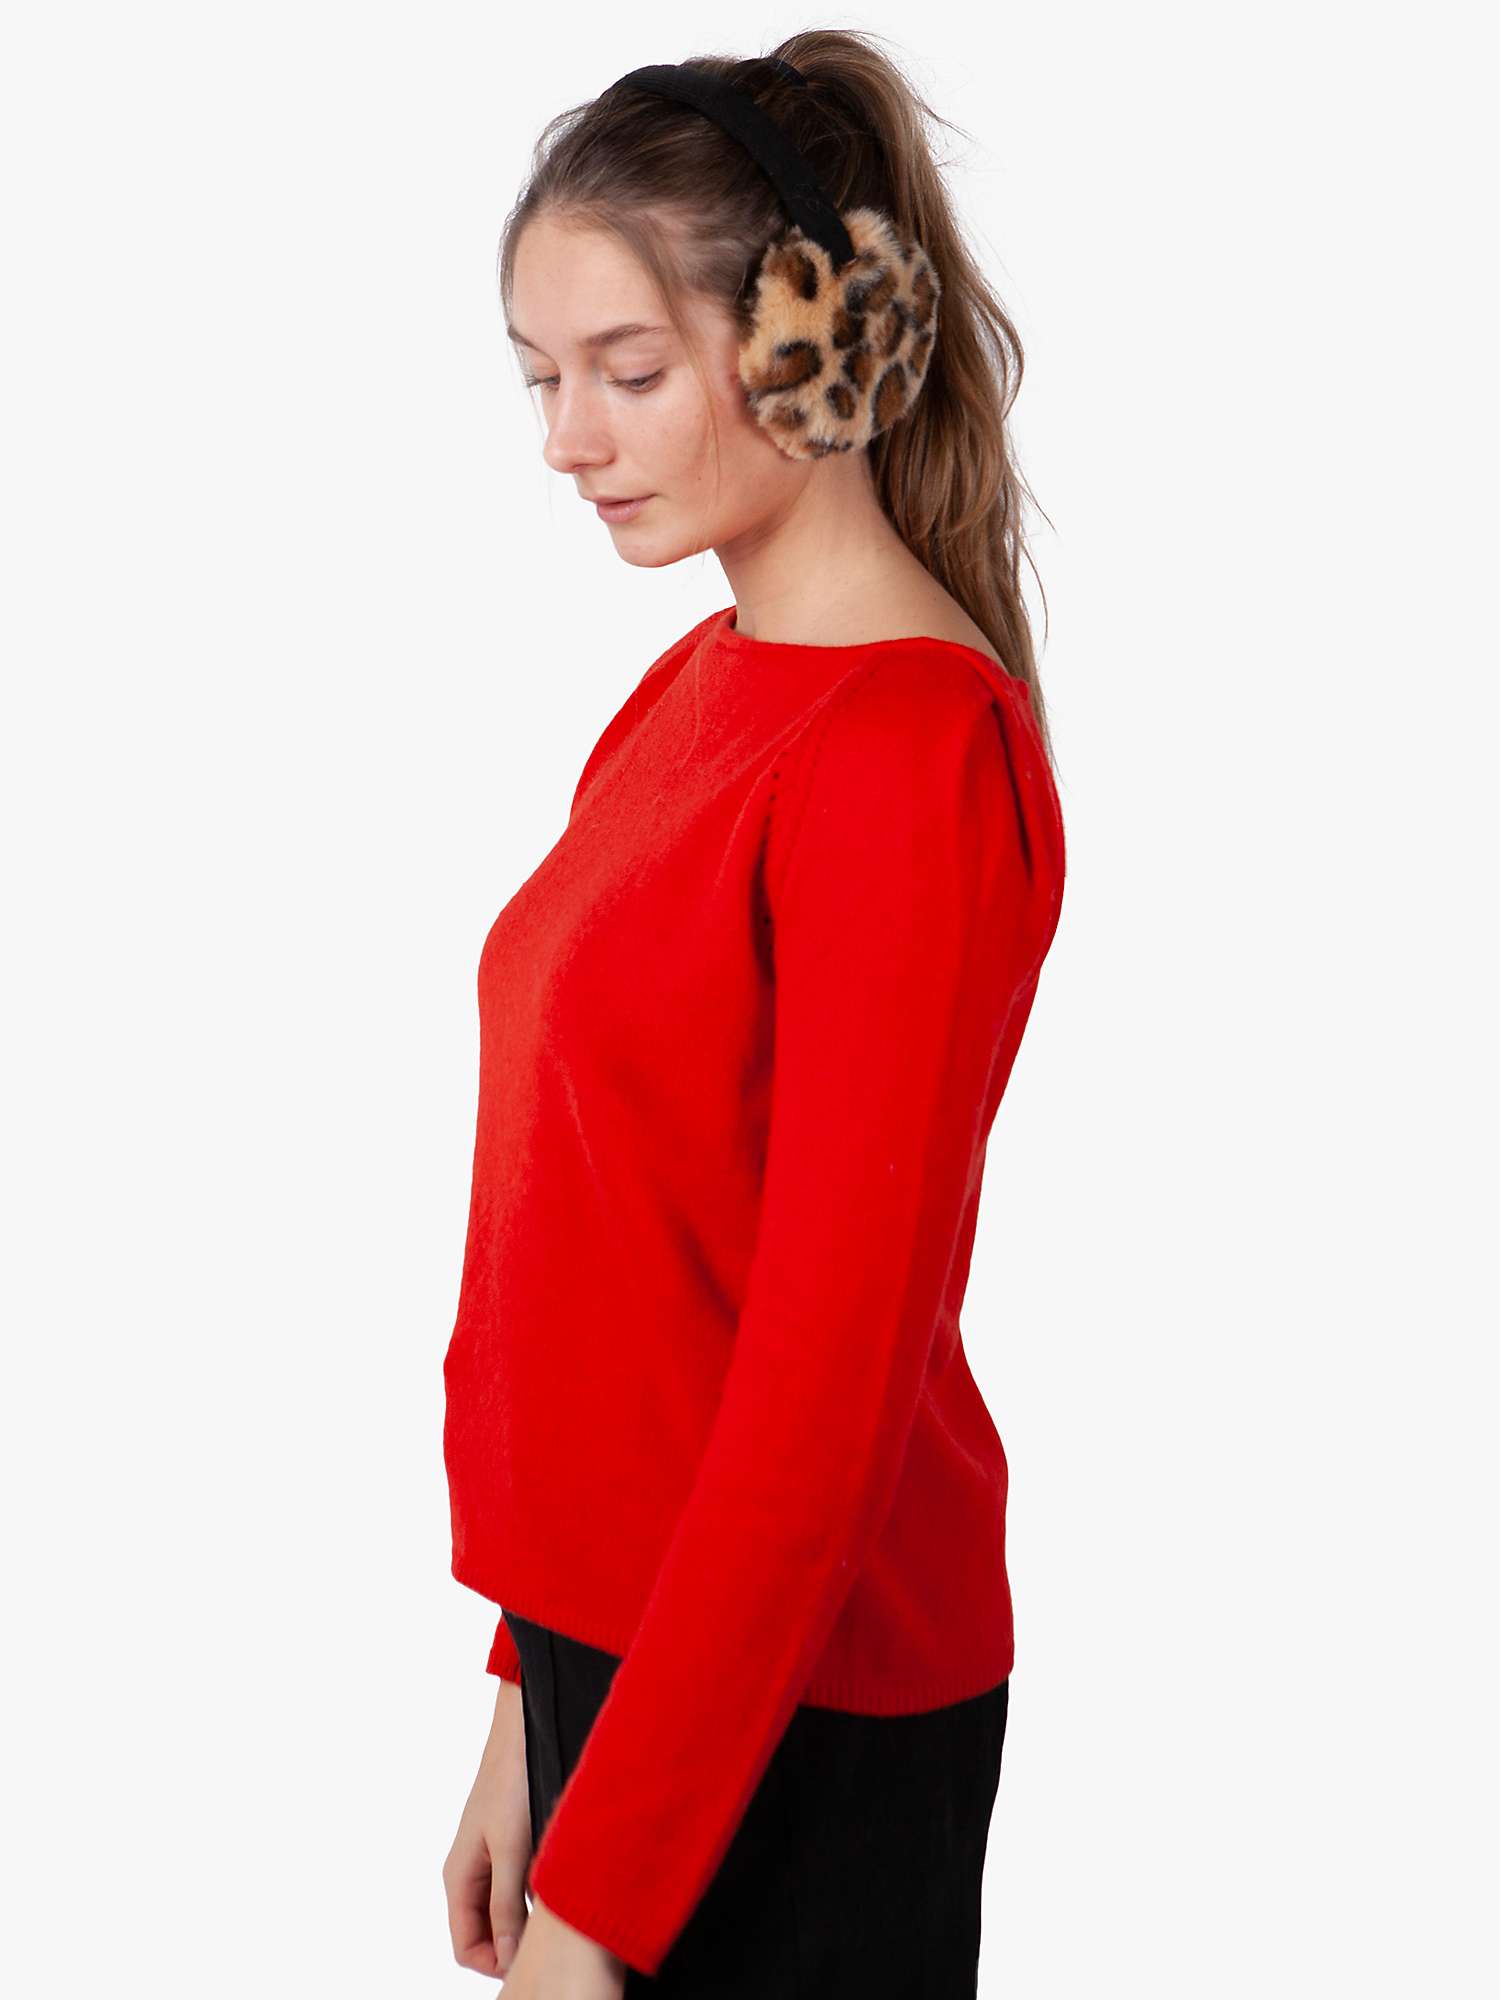 Buy Barts Faux Fur Earmuffs, One Size Online at johnlewis.com